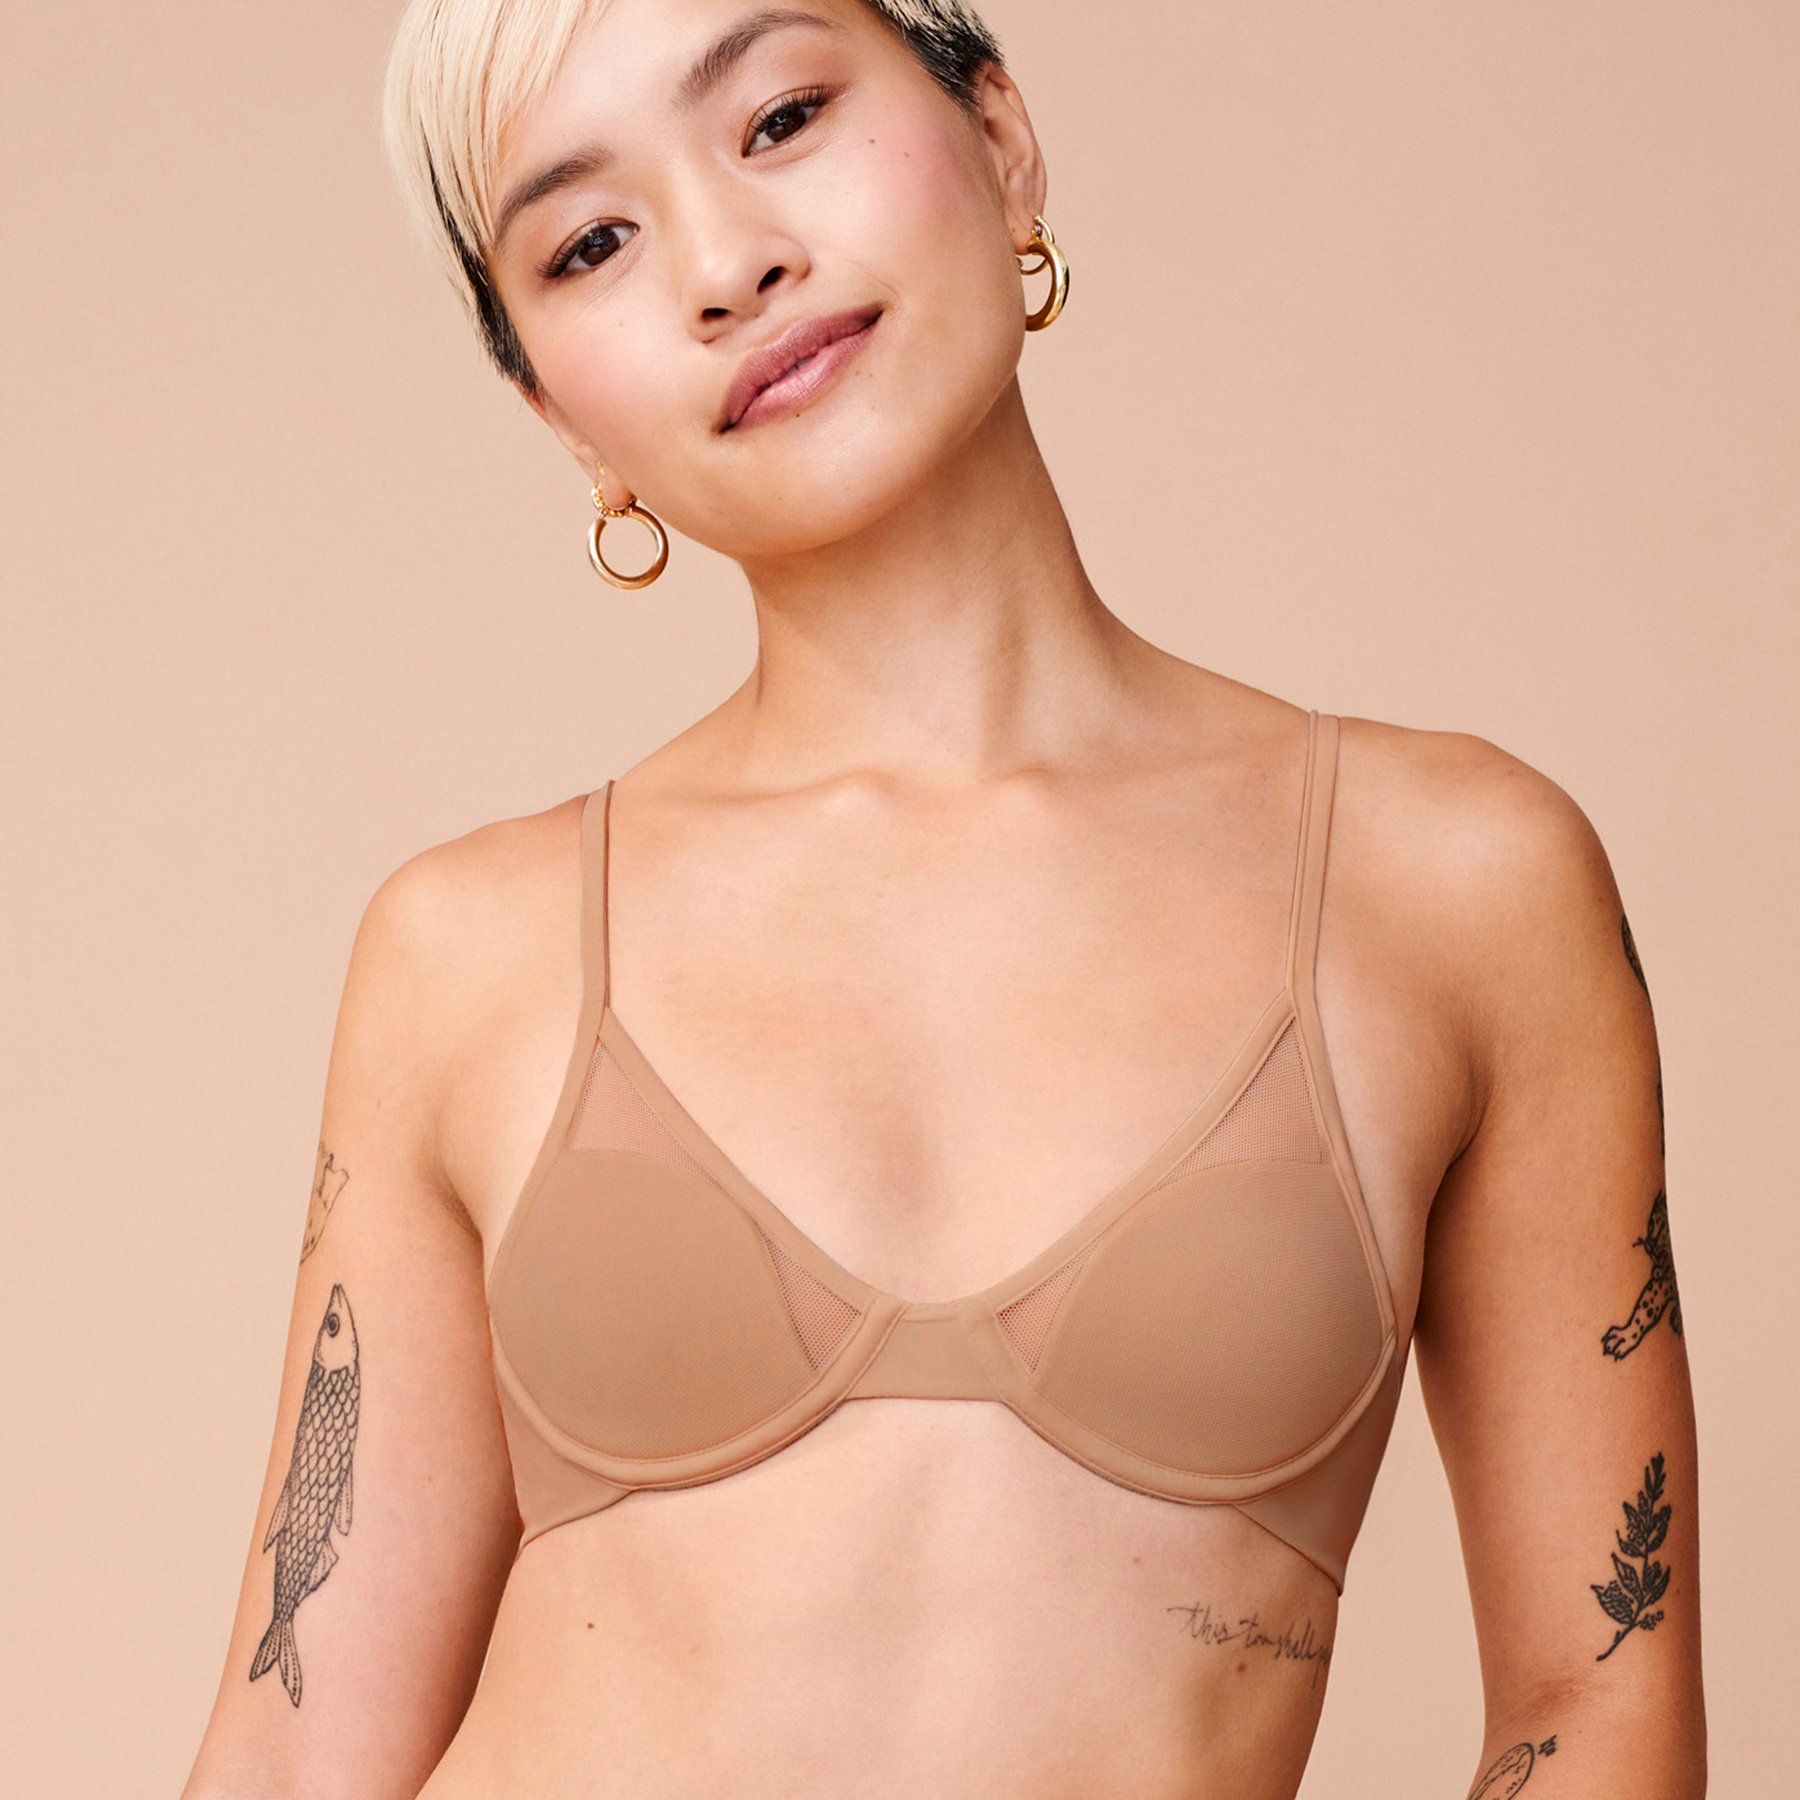 Aa Cup Small Breasts Naked - Pepper Bra Review 2023: Pepper Makes the Best Bra for Small Boobs